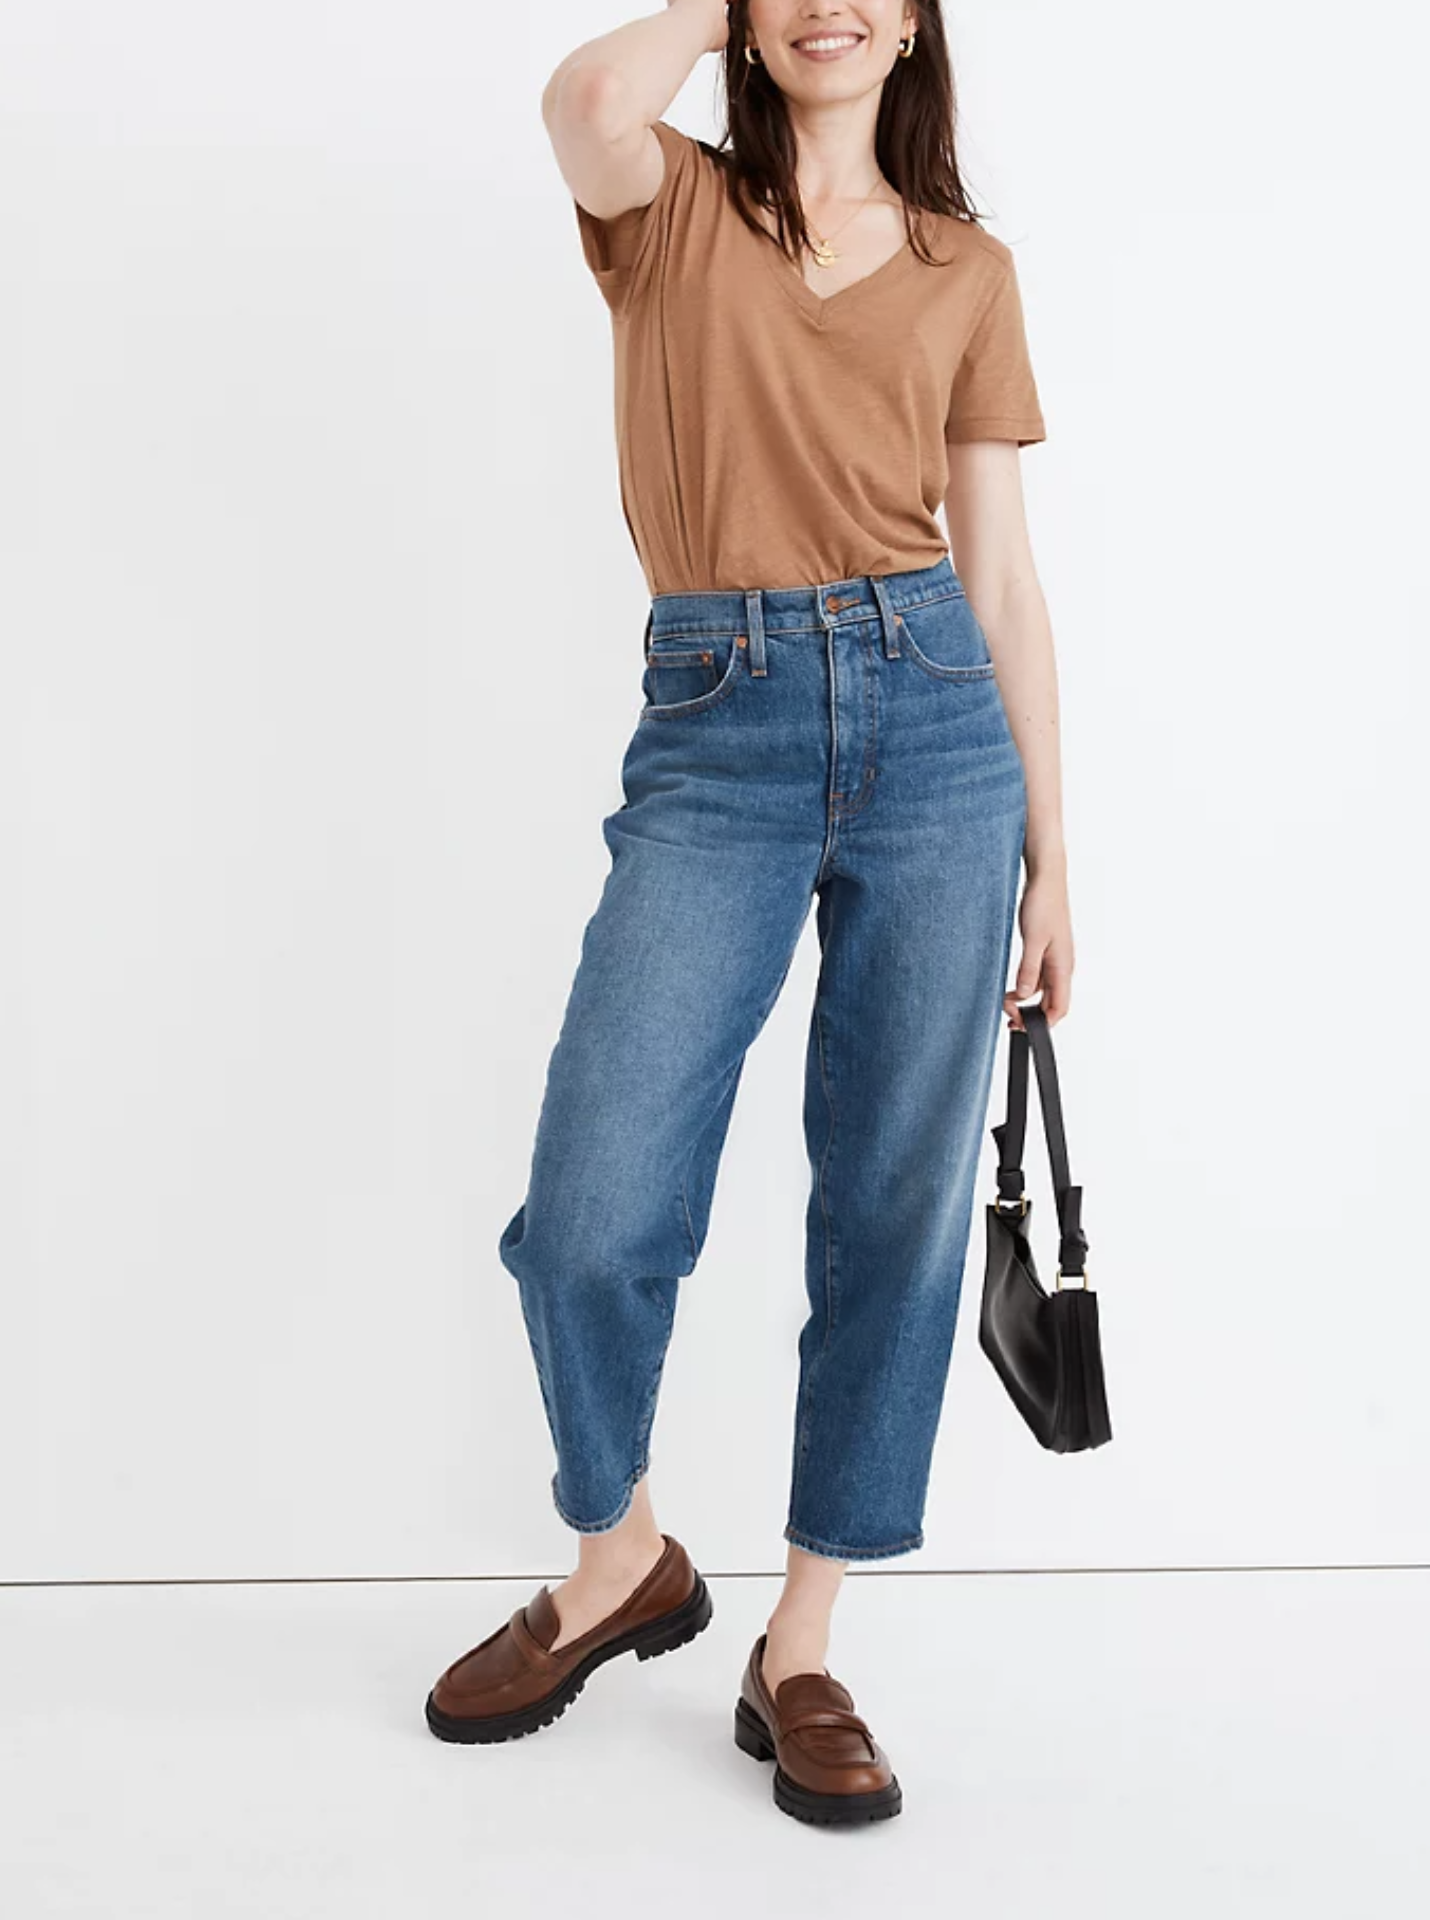 Lug Sole Loafers at Madewell